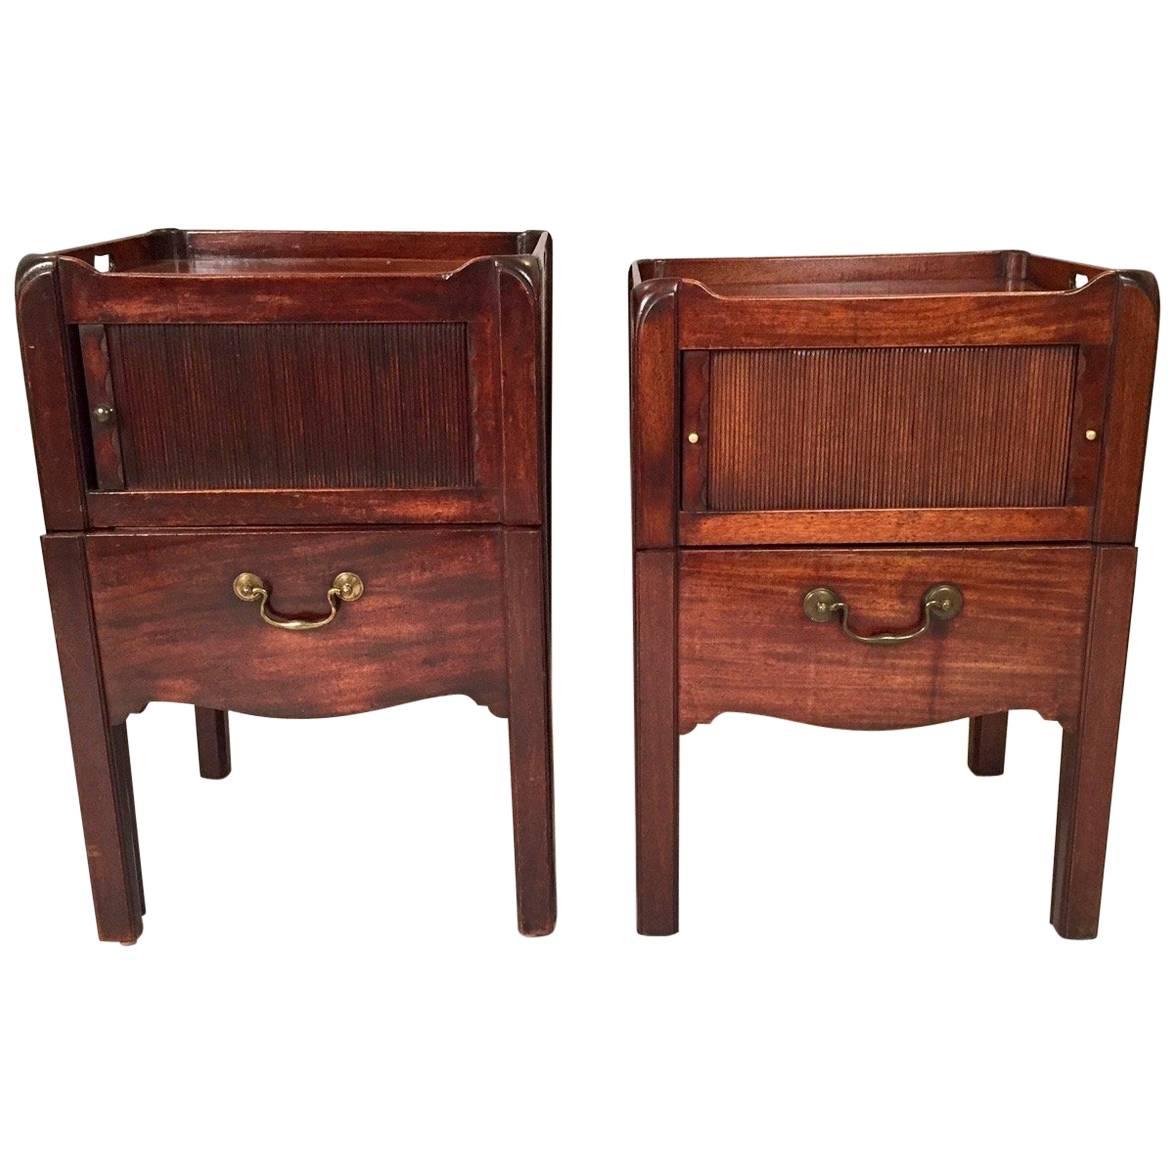 Matched Pair of Georgian Mahogany Bedside Commodes